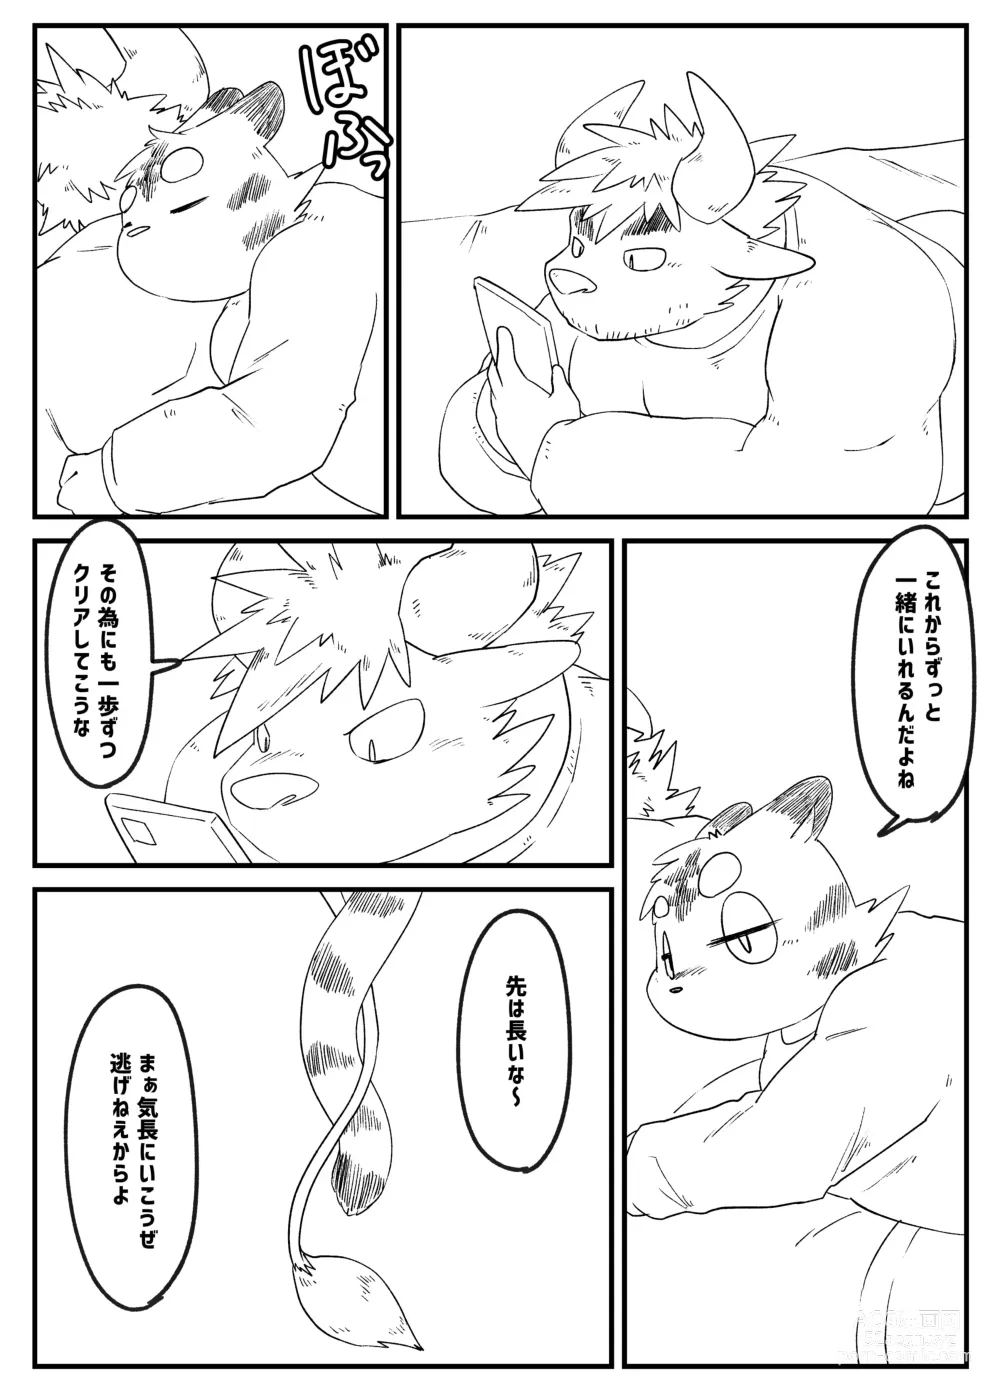 Page 4 of doujinshi Muscular Bull Teacher & Chubby Tiger Student 5